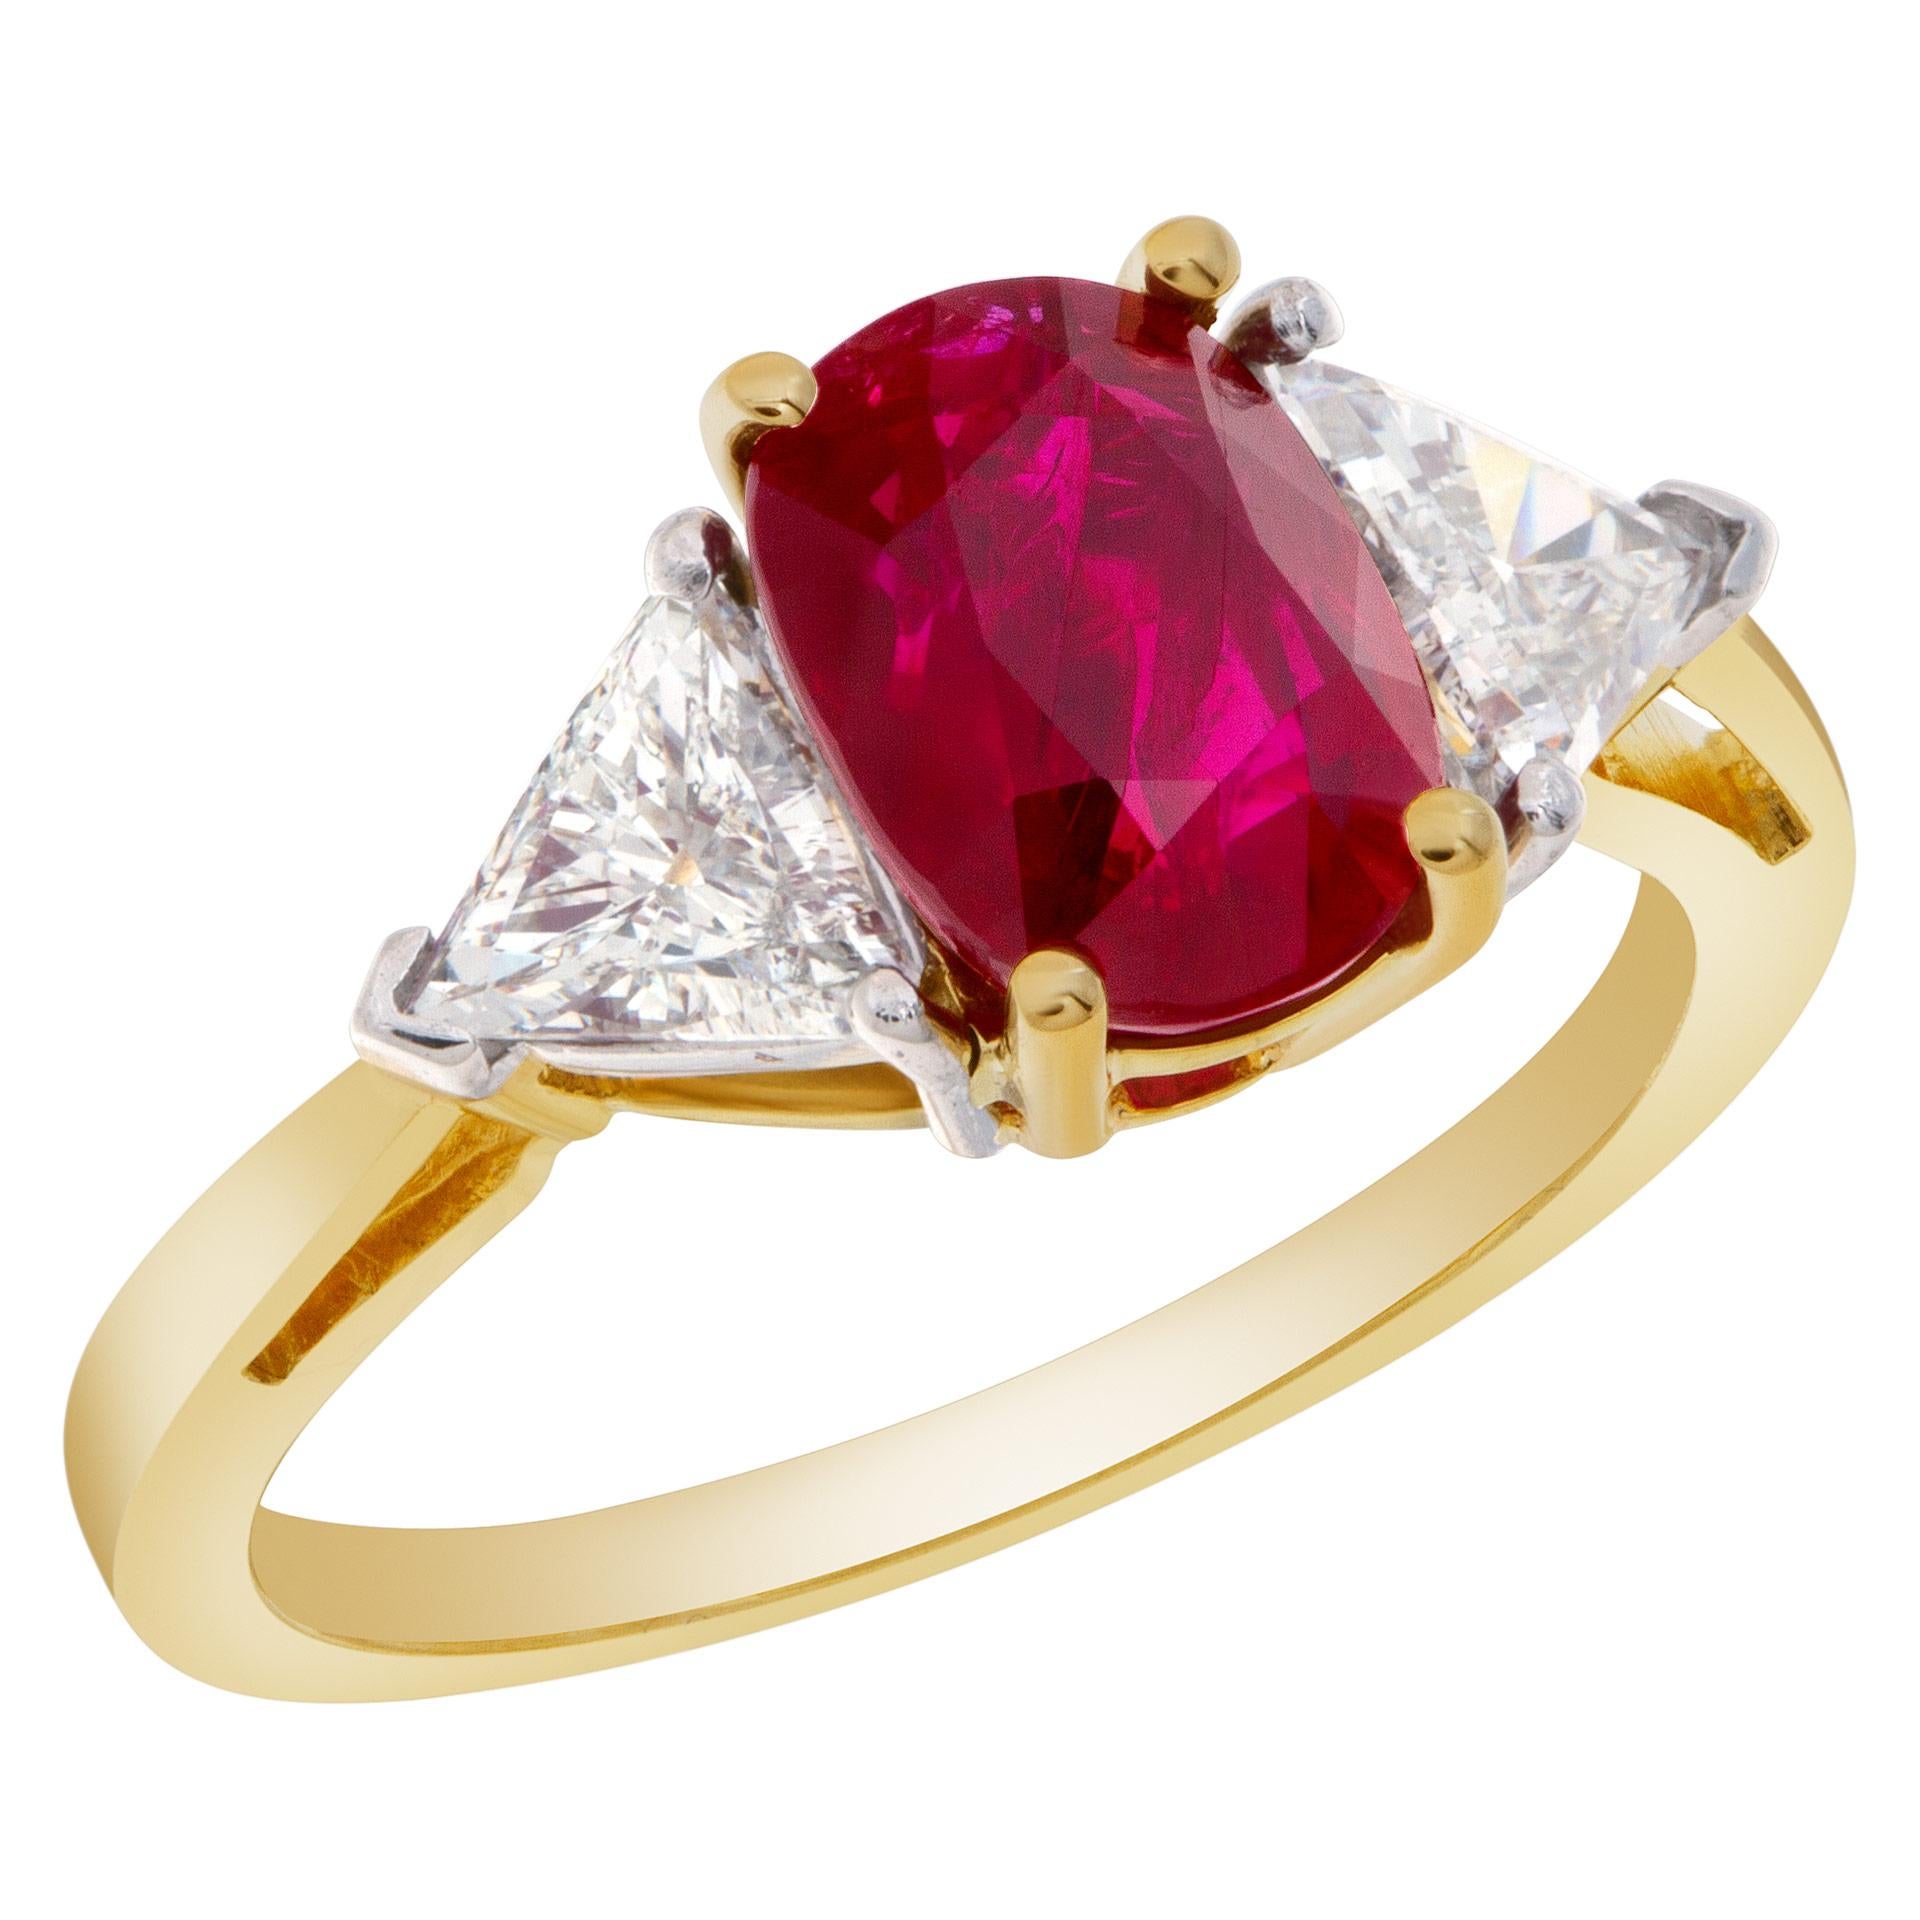 Modern Ruby and Diamond Ring in Platinum and 18 Karat Yellow Gold